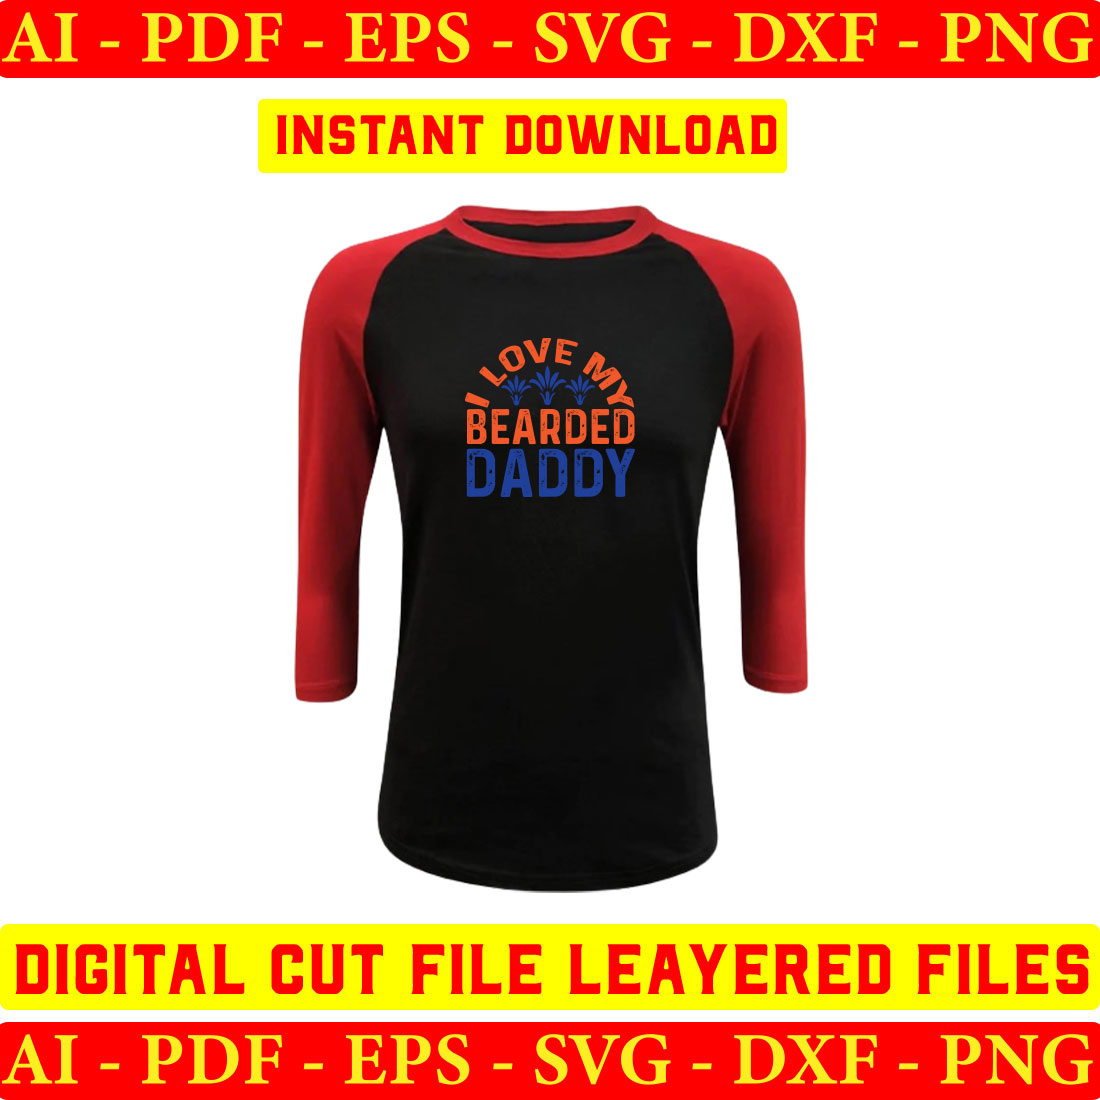 Black and red baseball shirt with the words love is a bearded daddy on it.